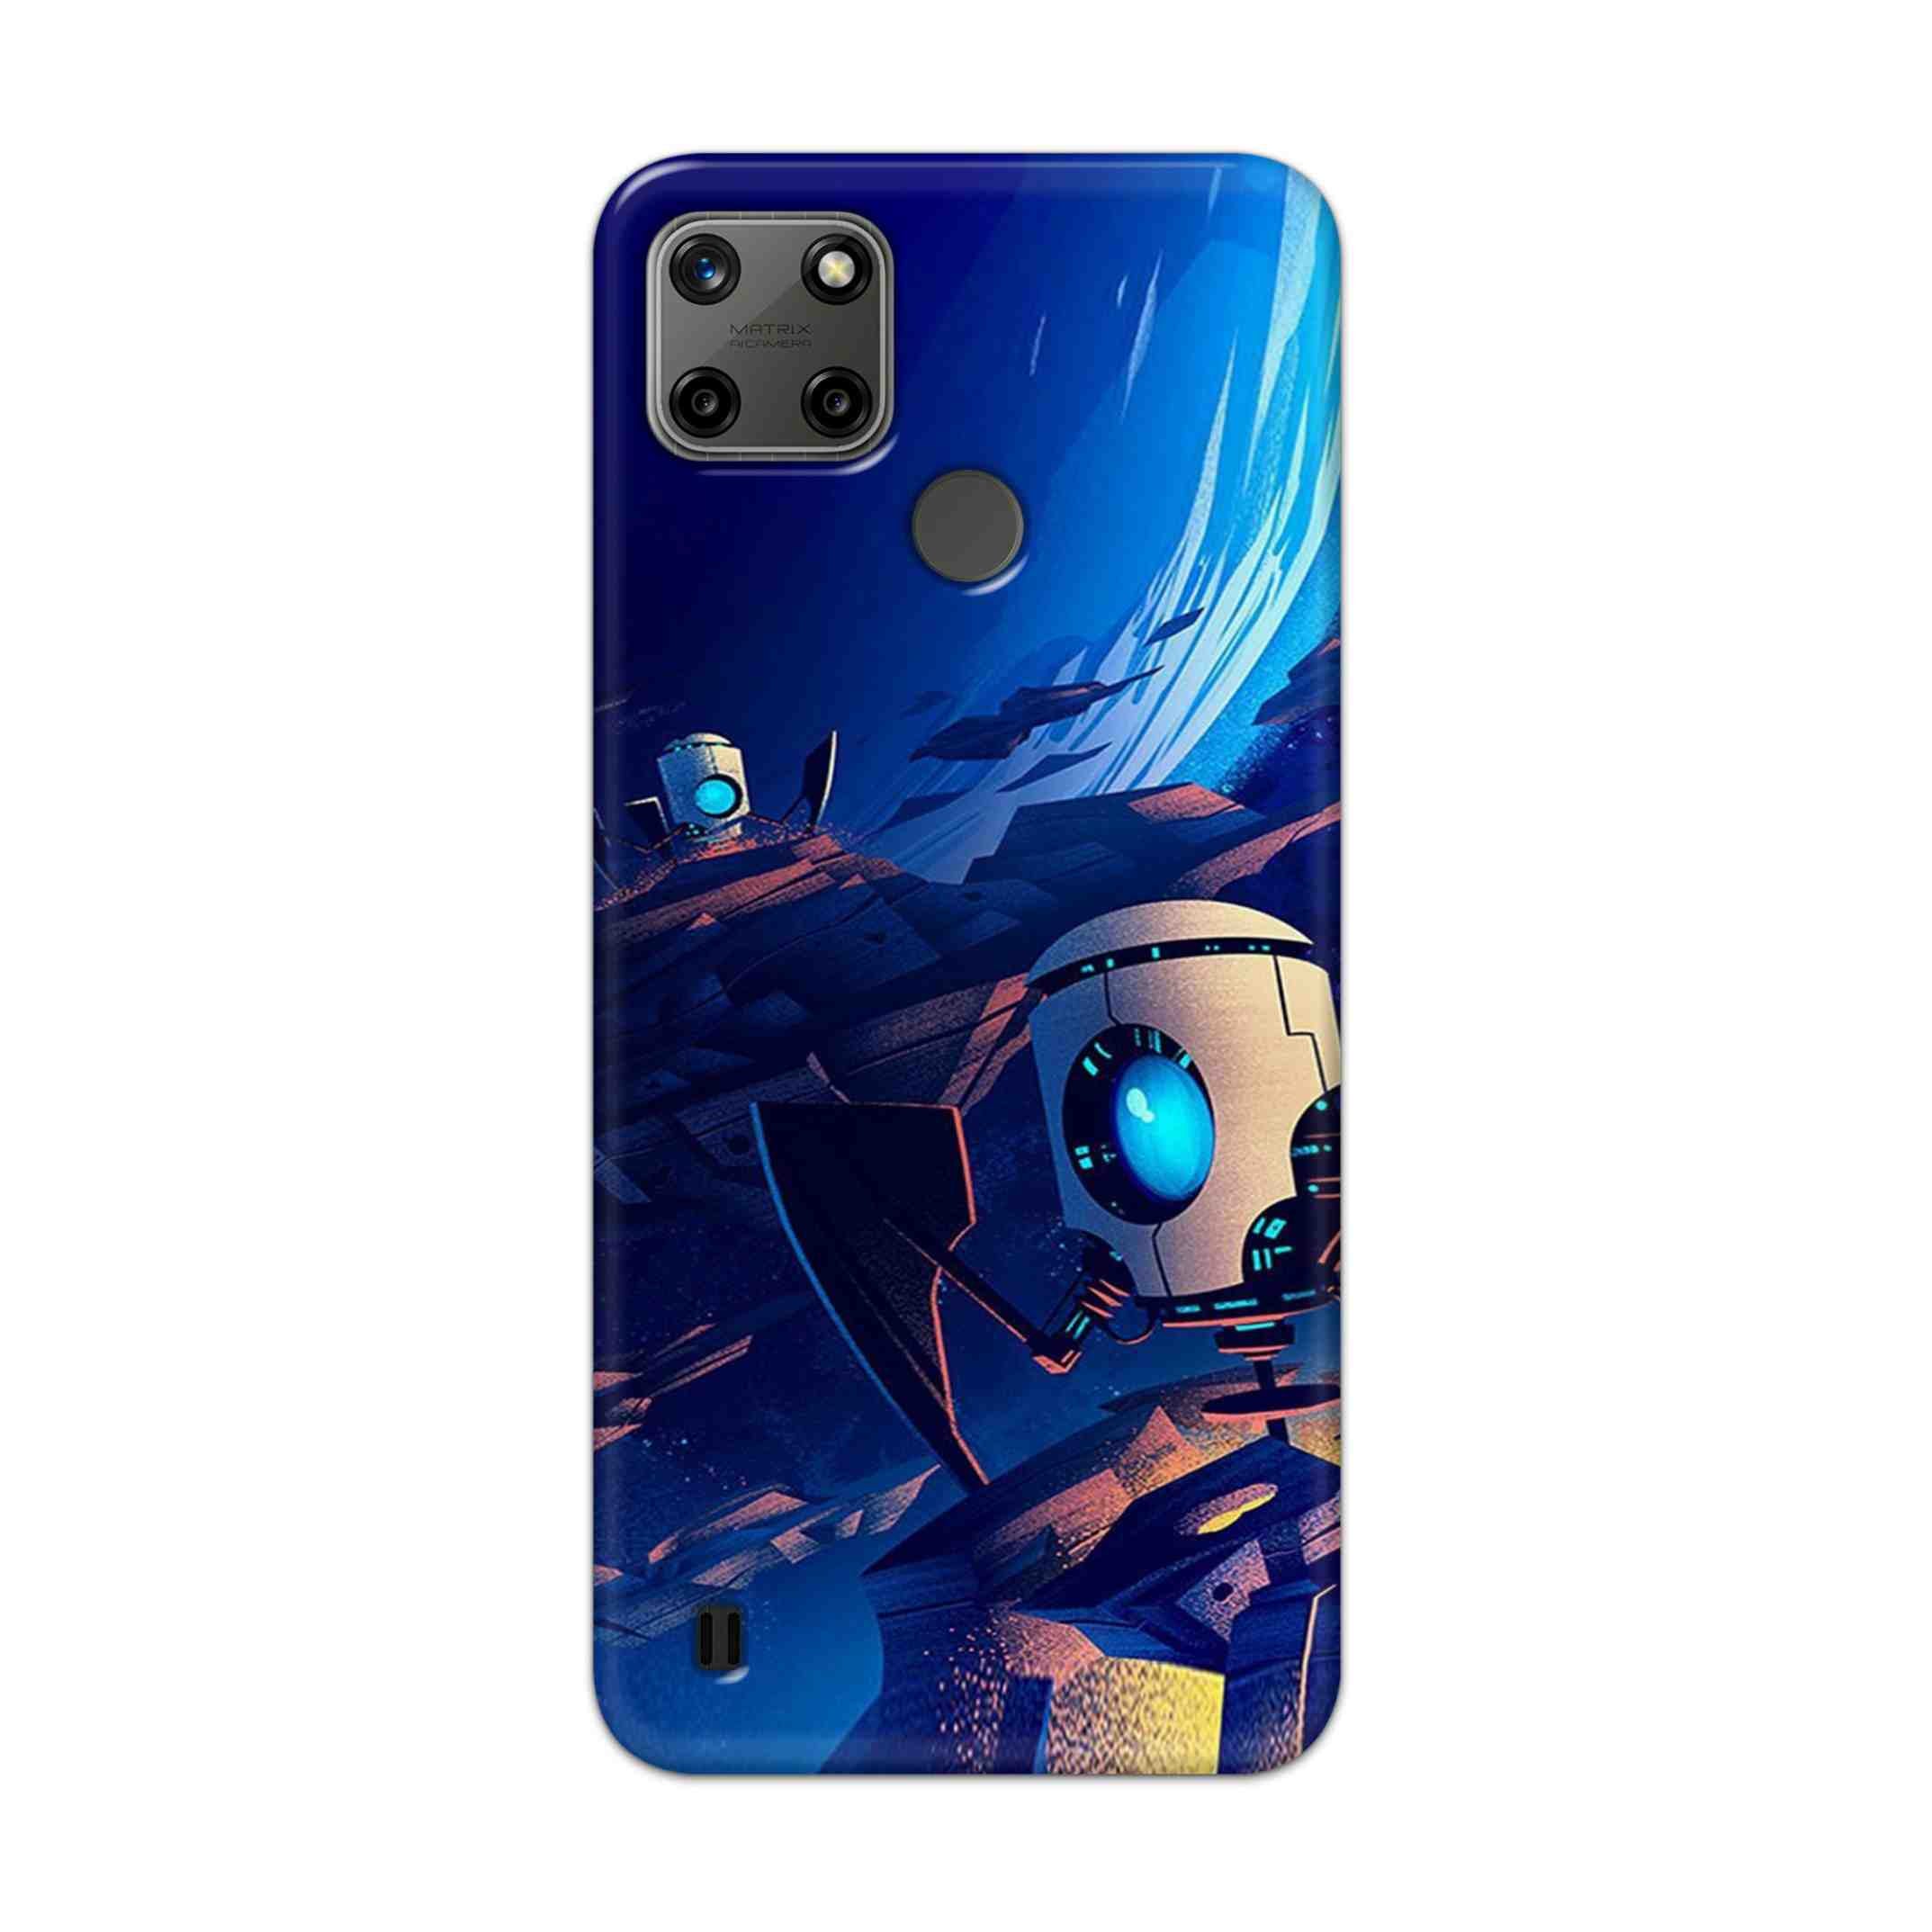 Buy Spaceship Robot Hard Back Mobile Phone Case Cover For Realme C25Y Online